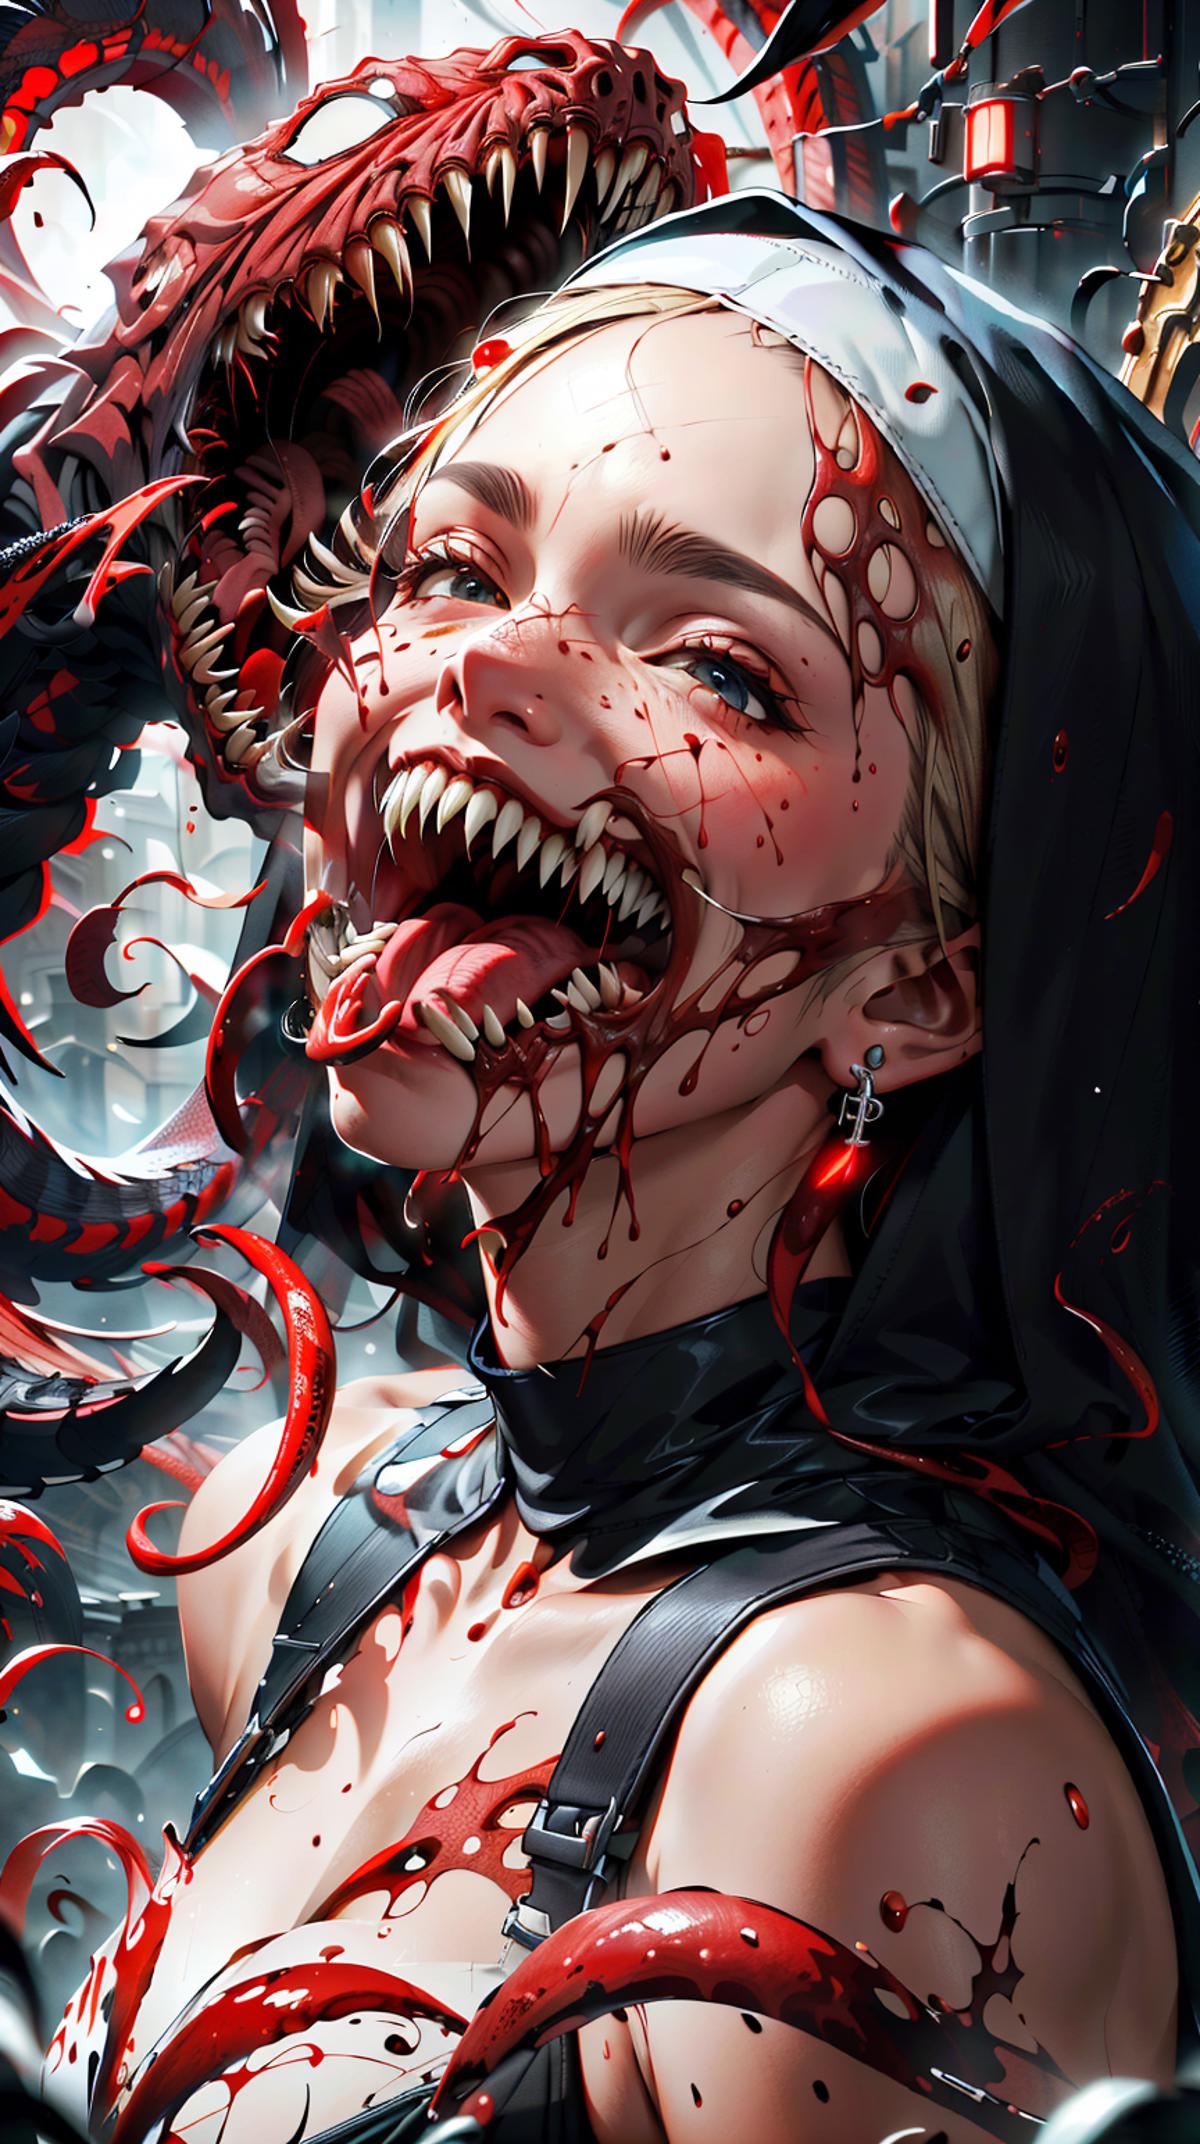 Carnage Style! - Blood and gore - NSFW - NSFAnywhere! image by mnemic